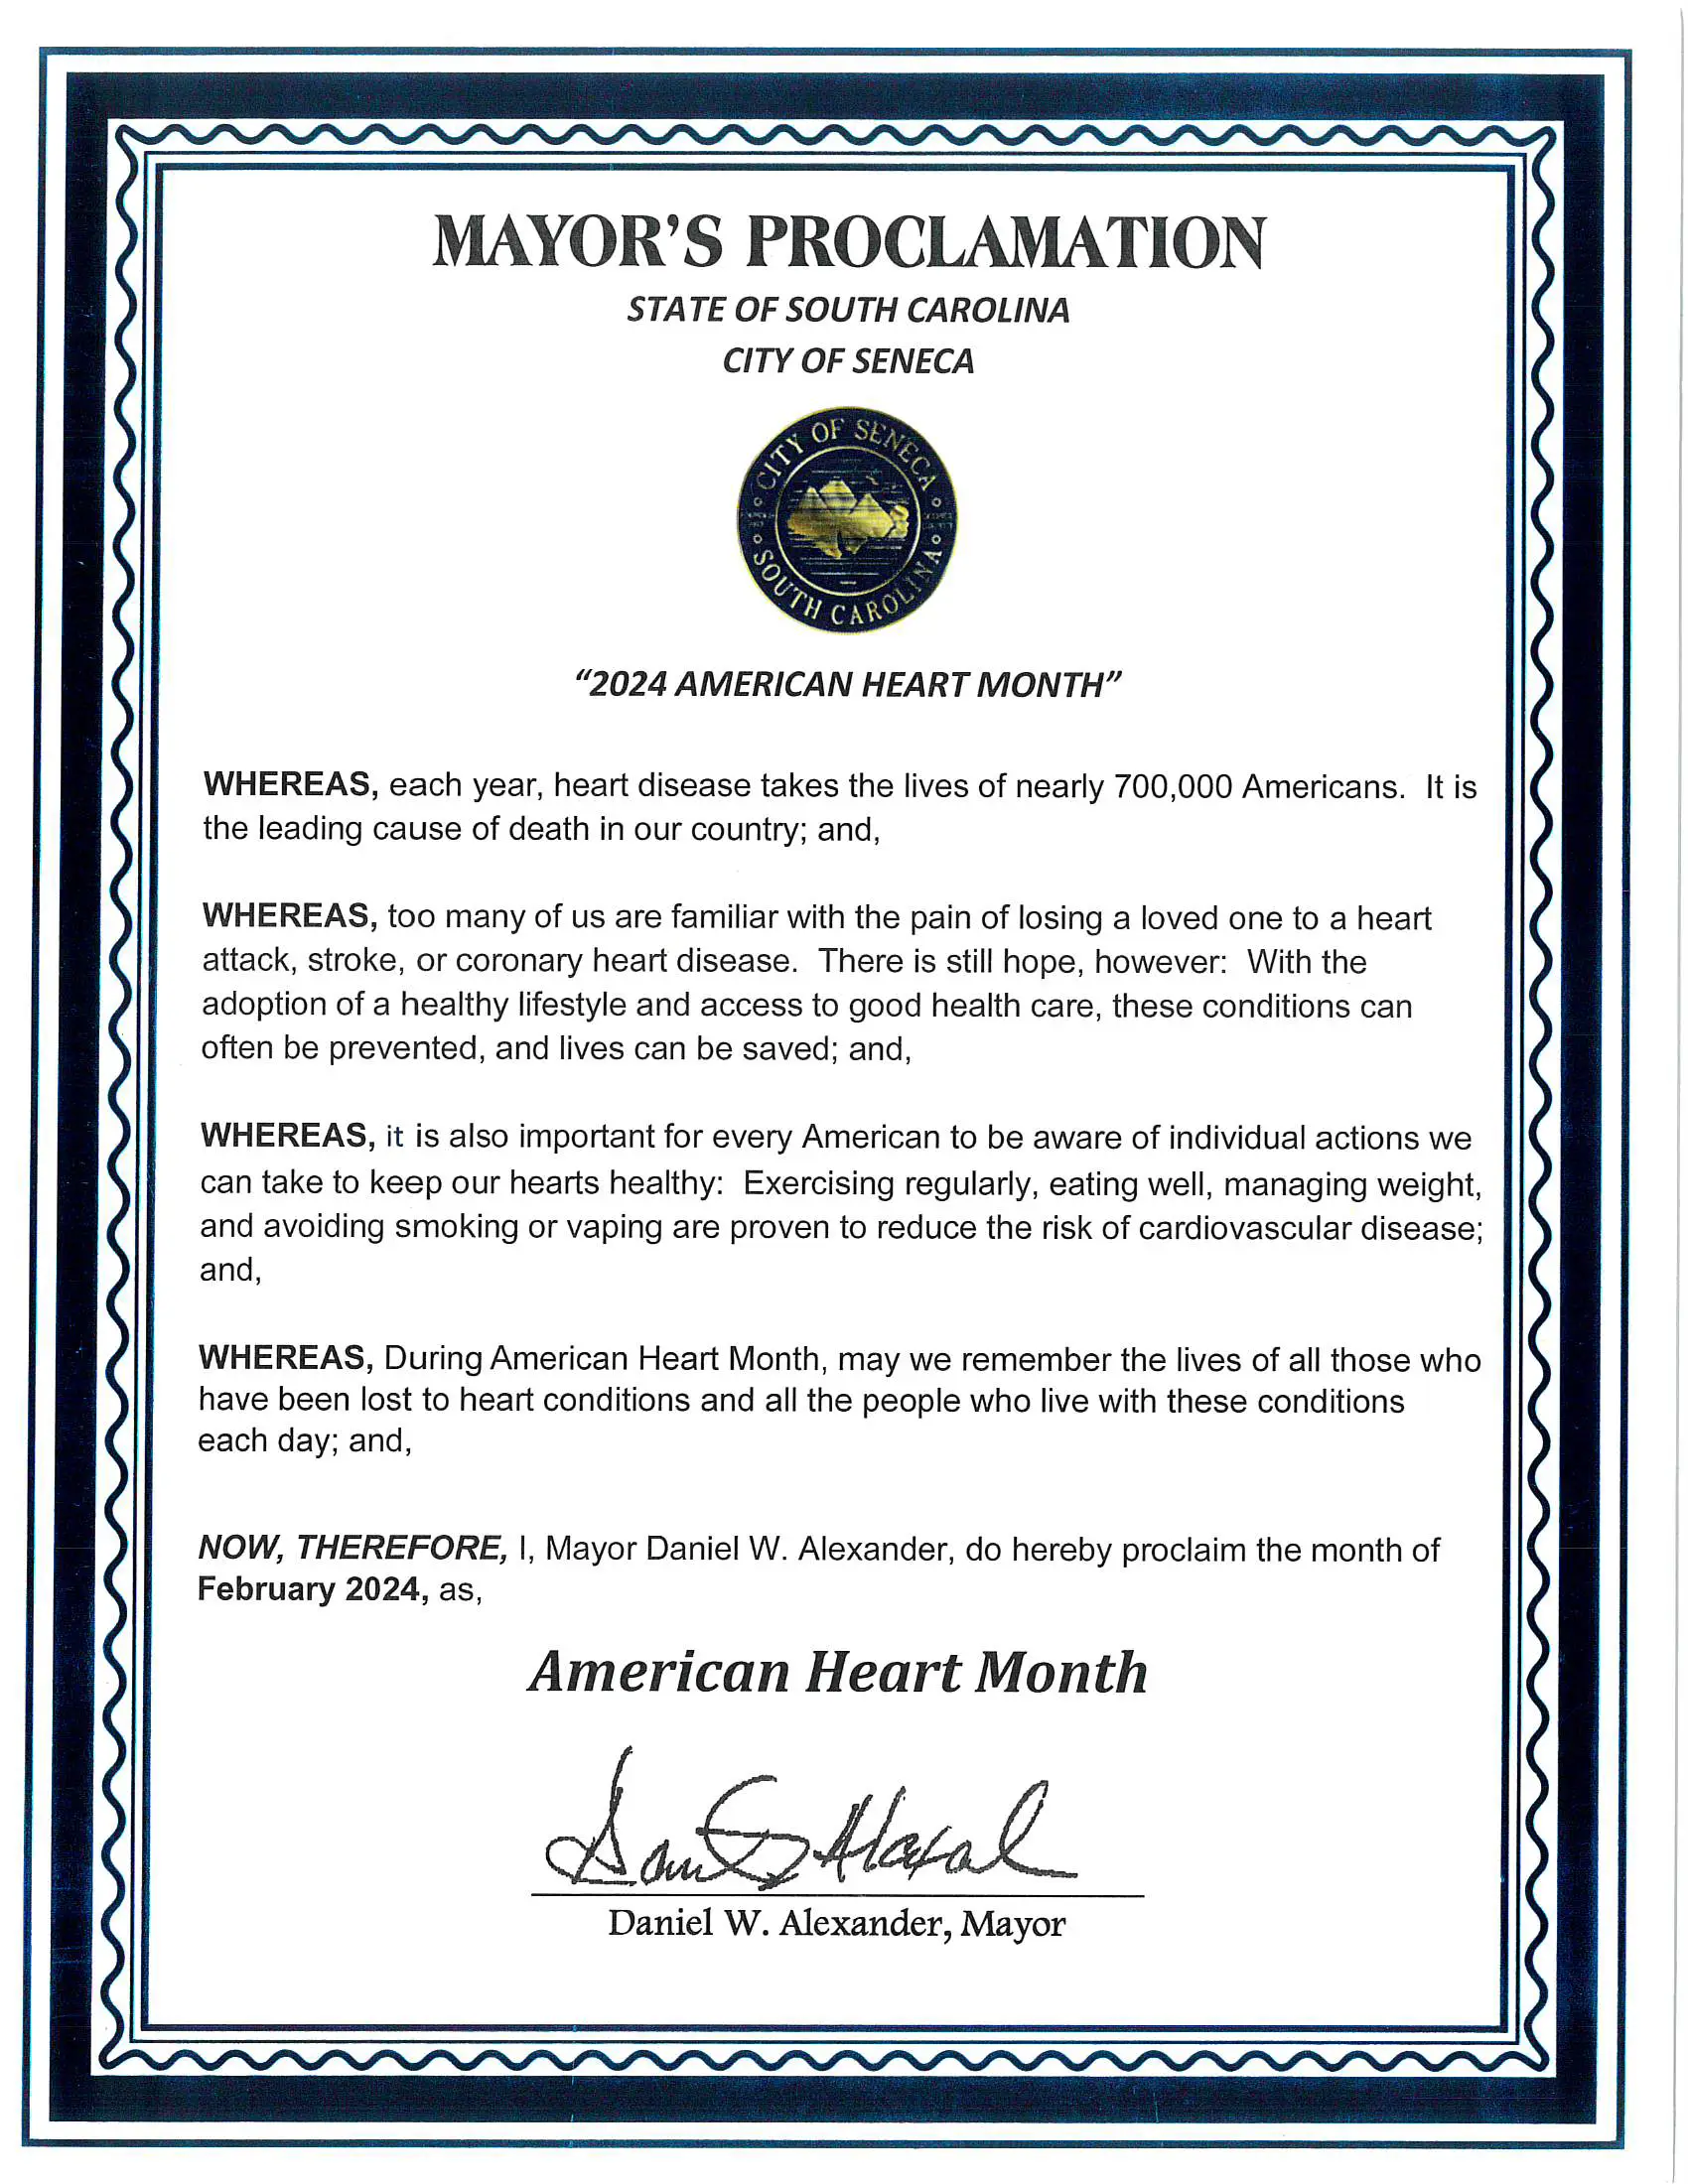 mayor-s-proclamation-american-heart-month-2024